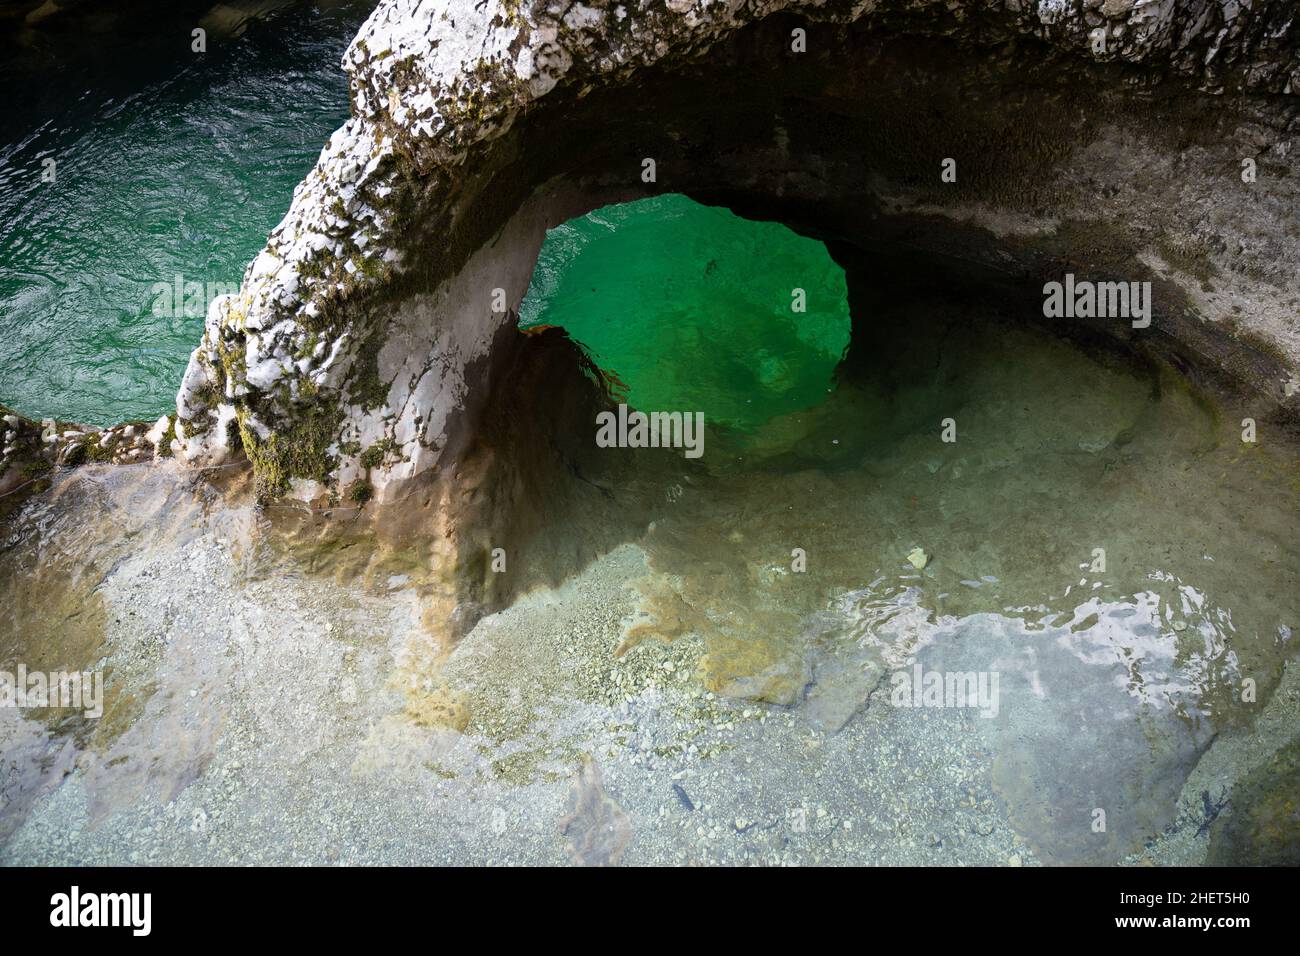 Little Elephant, a rock formation in Mostnica river gorge in Slovenia Stock Photo